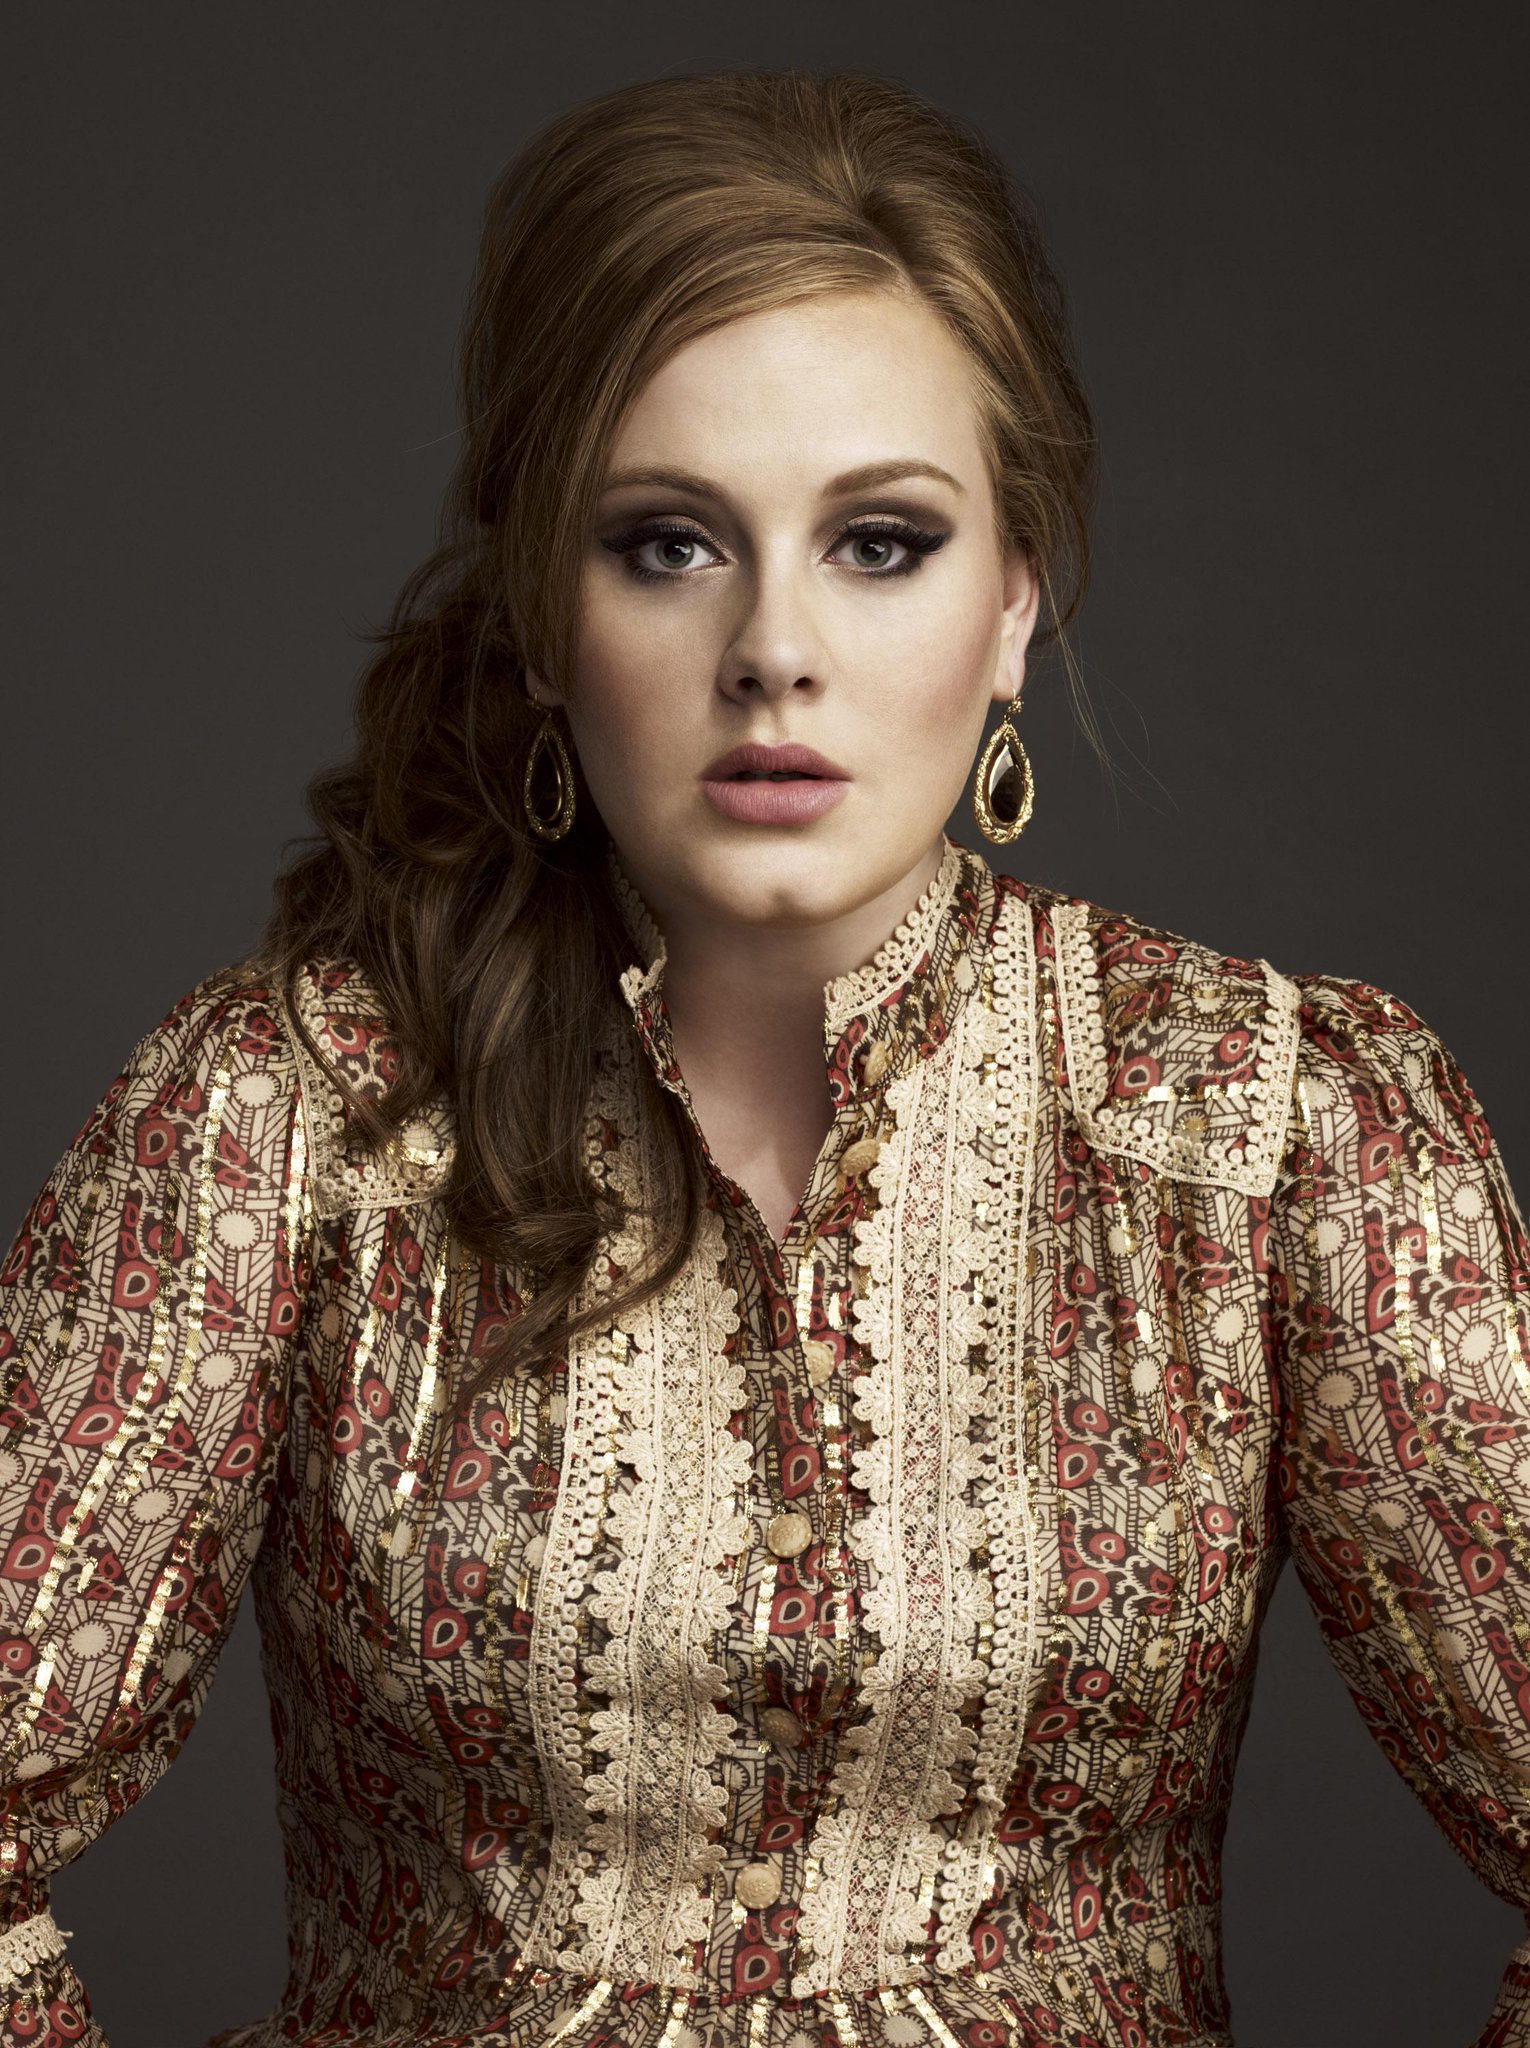 Happy Birthday to Adele, who turns 27 today! 